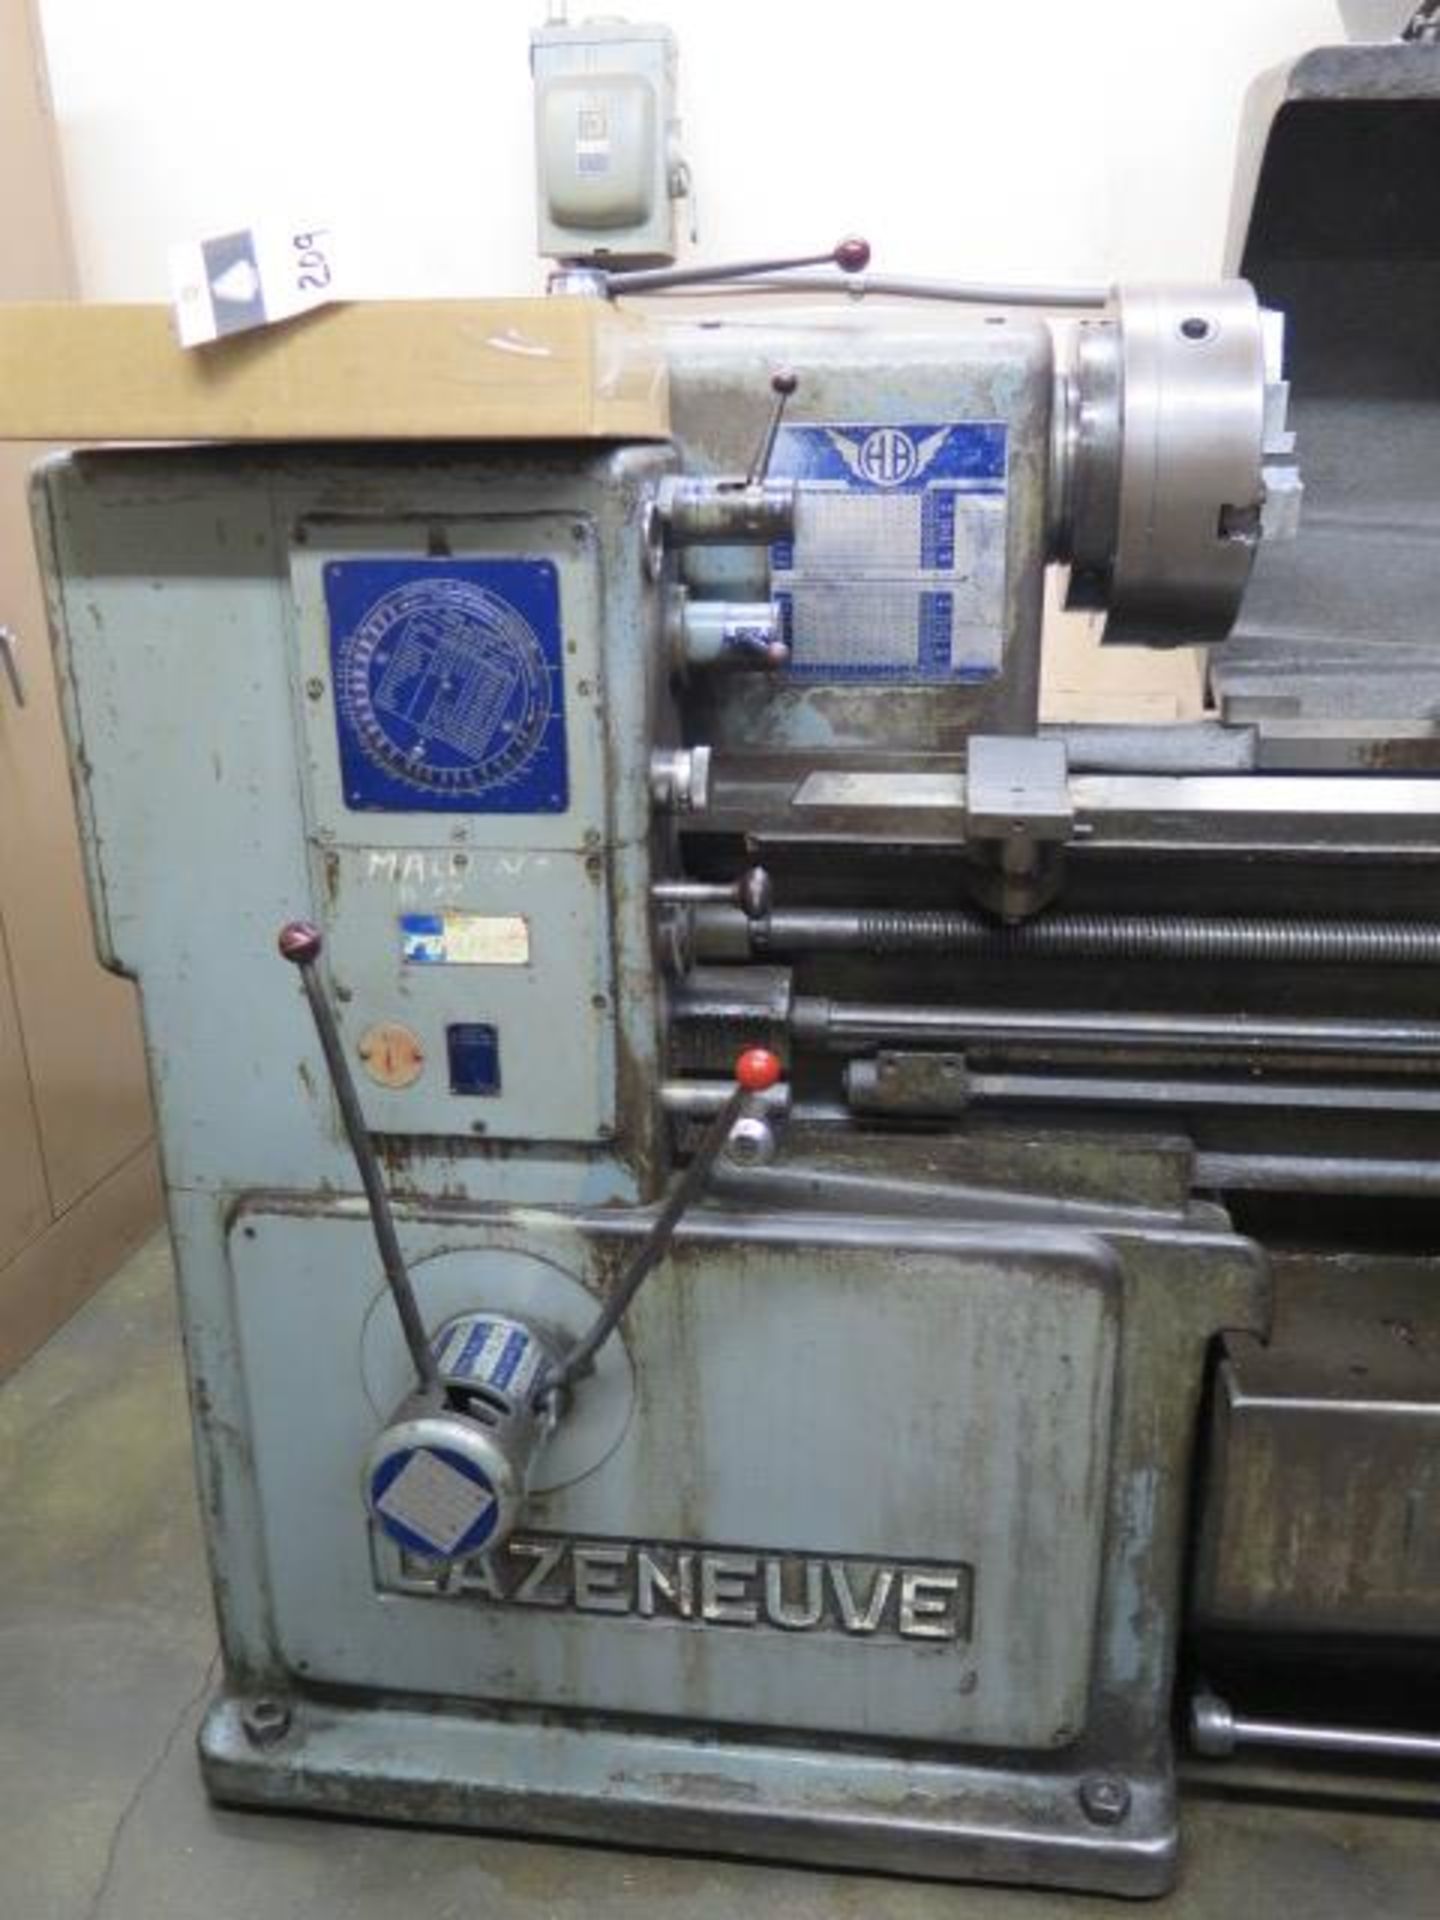 Cazeneuve 21” x 58” Geared Head Gap Bed Lathe s/n 11293 w/ 40-2000 RPM, Inch Threading, SOLD AS IS - Image 3 of 11